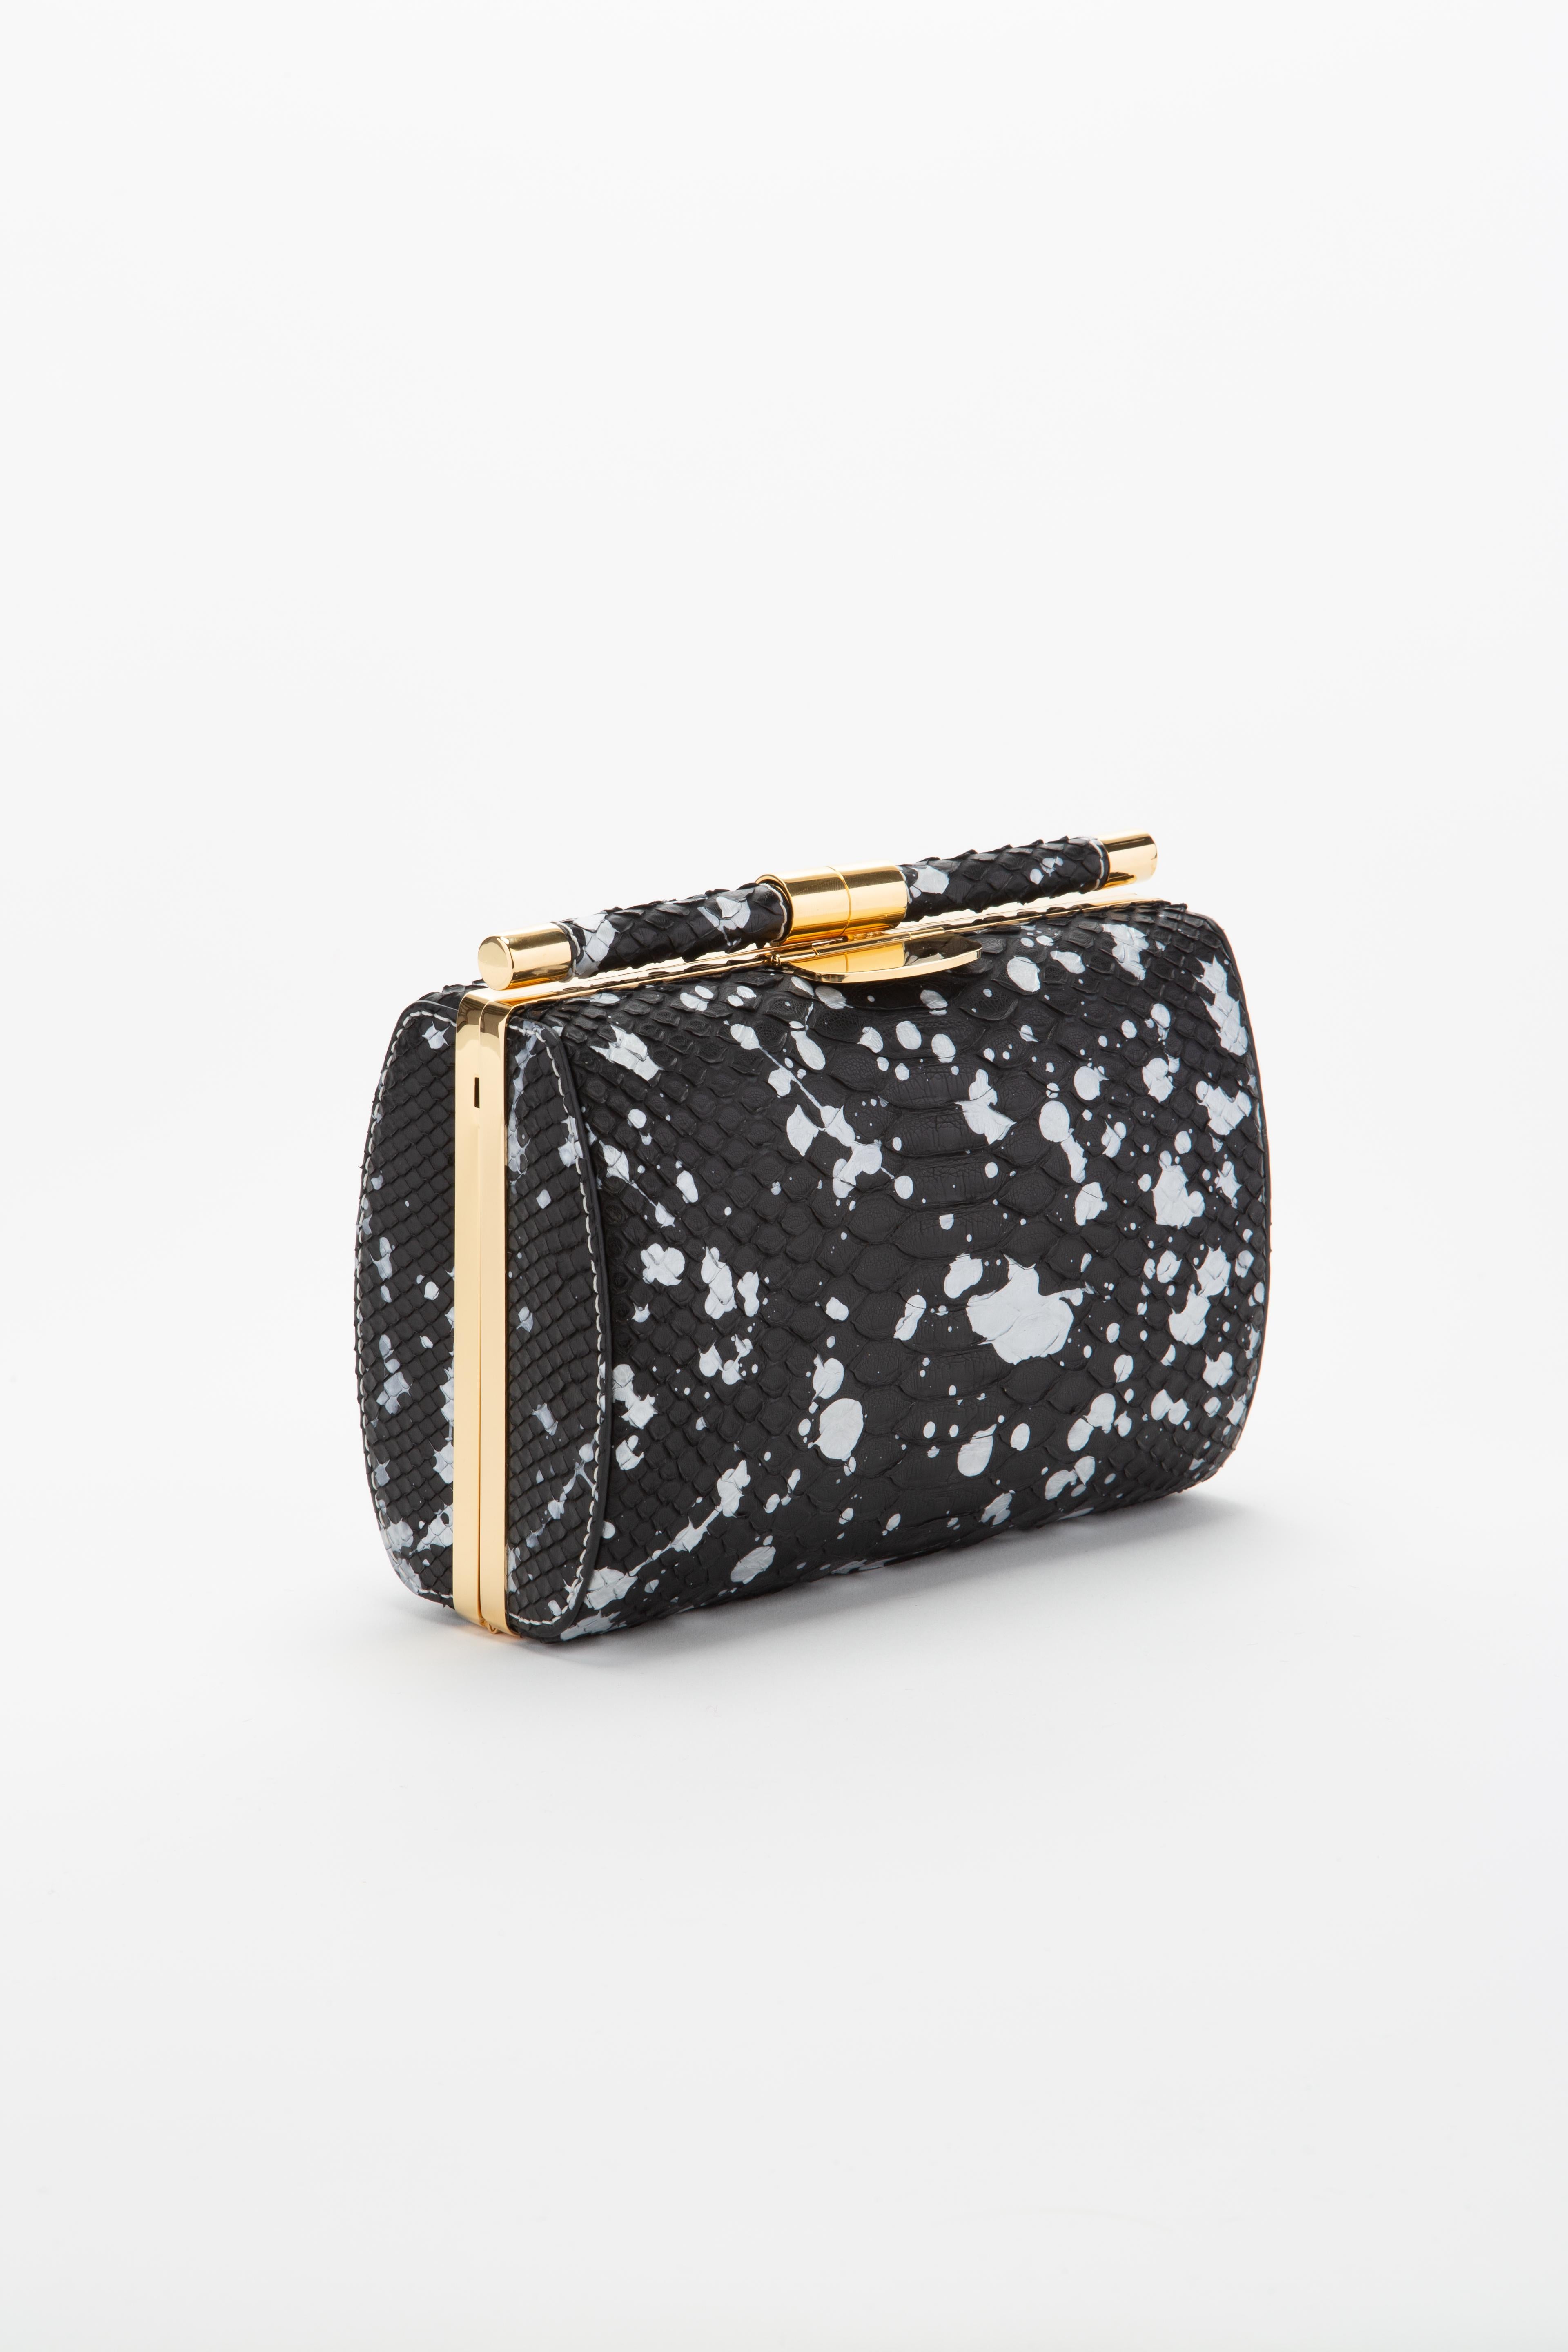 The Anjuli clutch is a structured oval clutch, with an optional cross-body chain, and interior pocket. It features our signature slide-lock closure and Thayer blue satin lining. 

Size: Medium
Hardware: Gold
Interior/Lining: Satin
Dimensions: 7.5” L